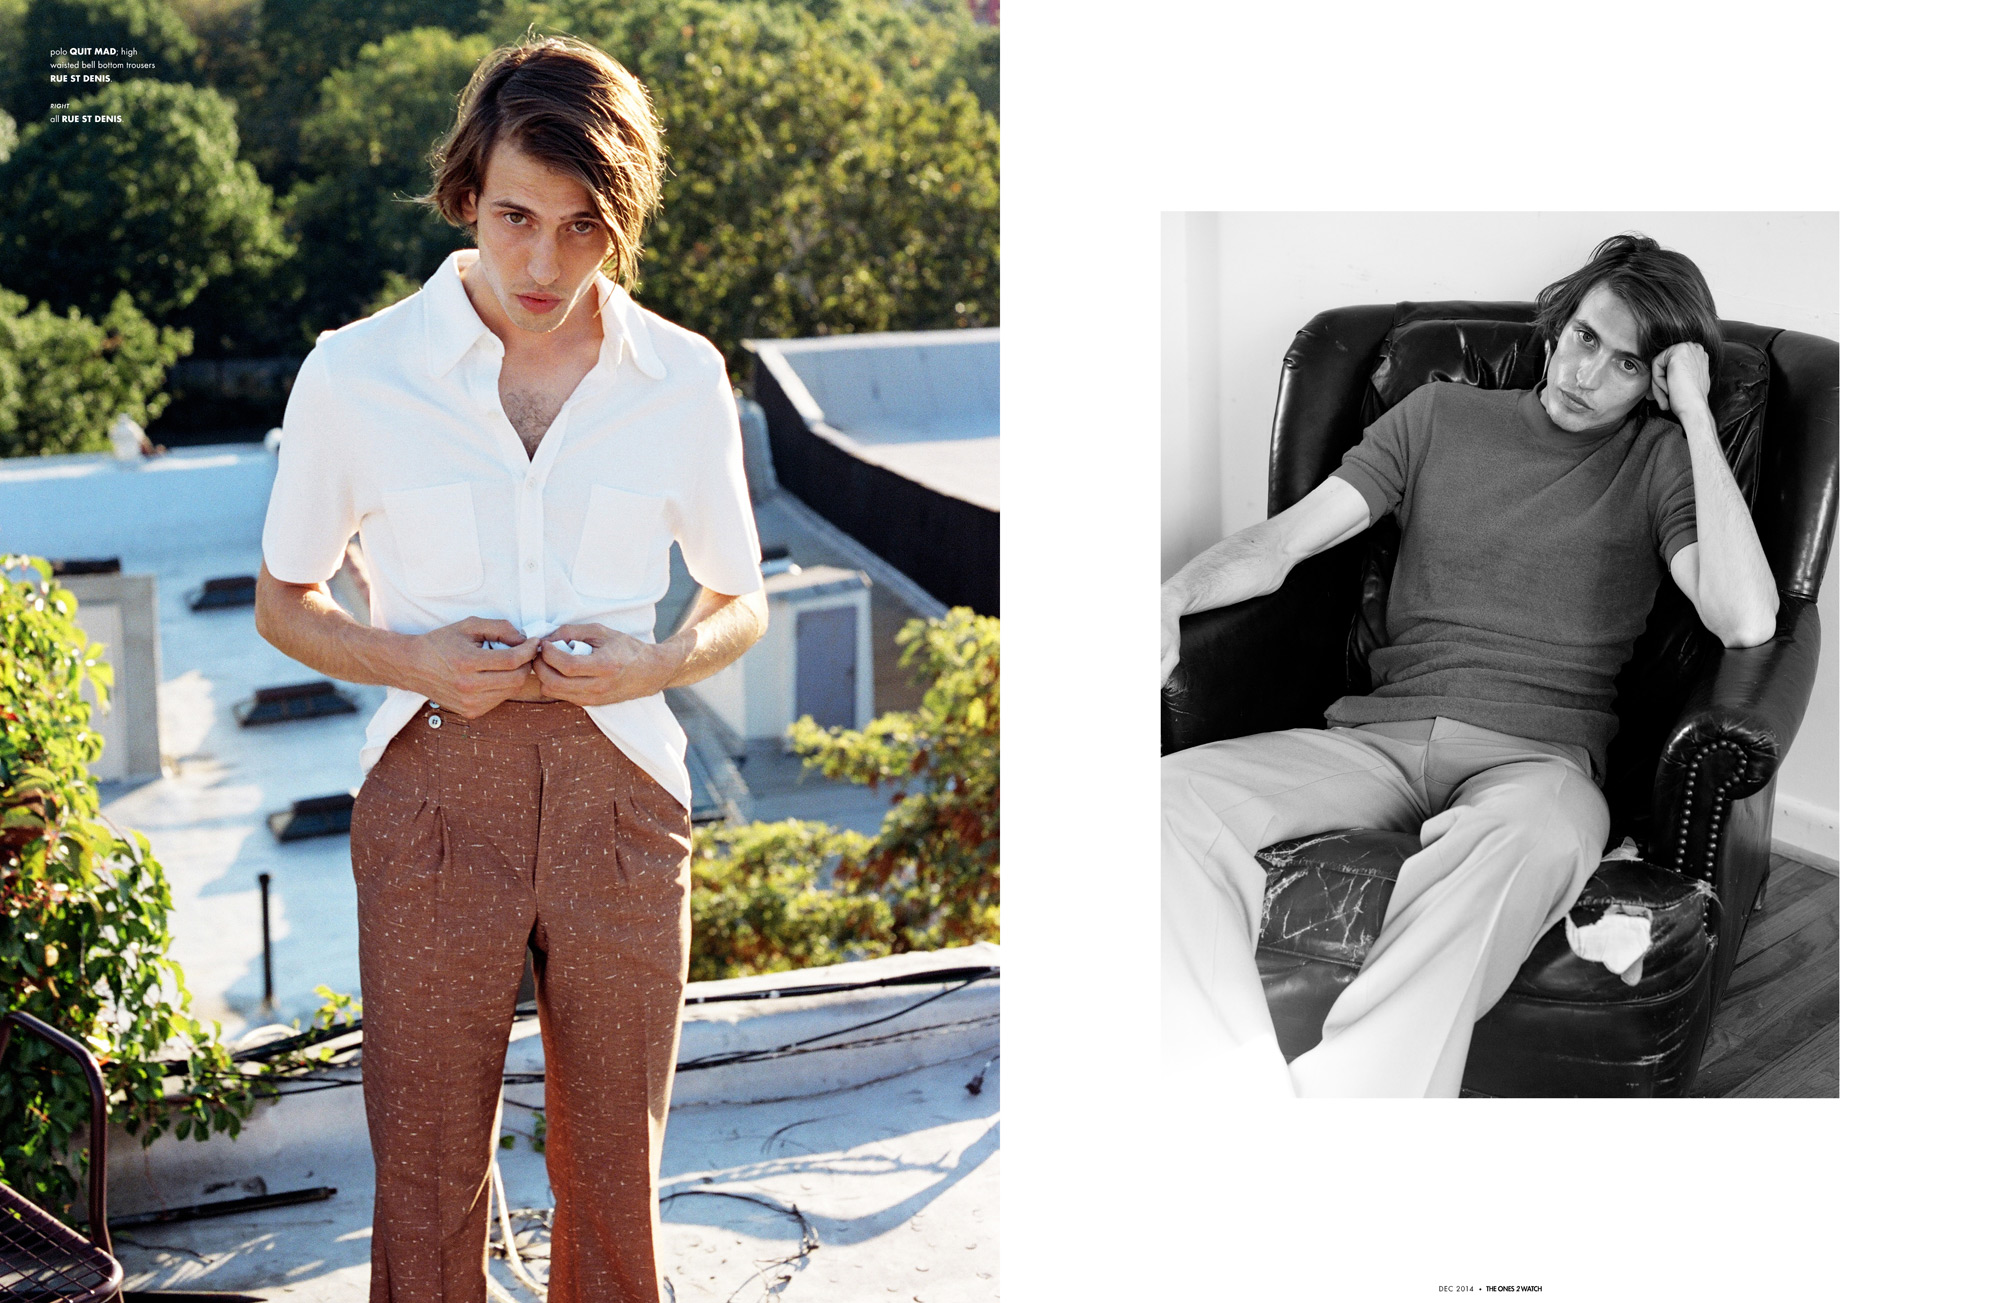 polo QUIT MAD; high waisted bell bottom trousers RUE ST DENIS. right: all RUE ST DENIS.